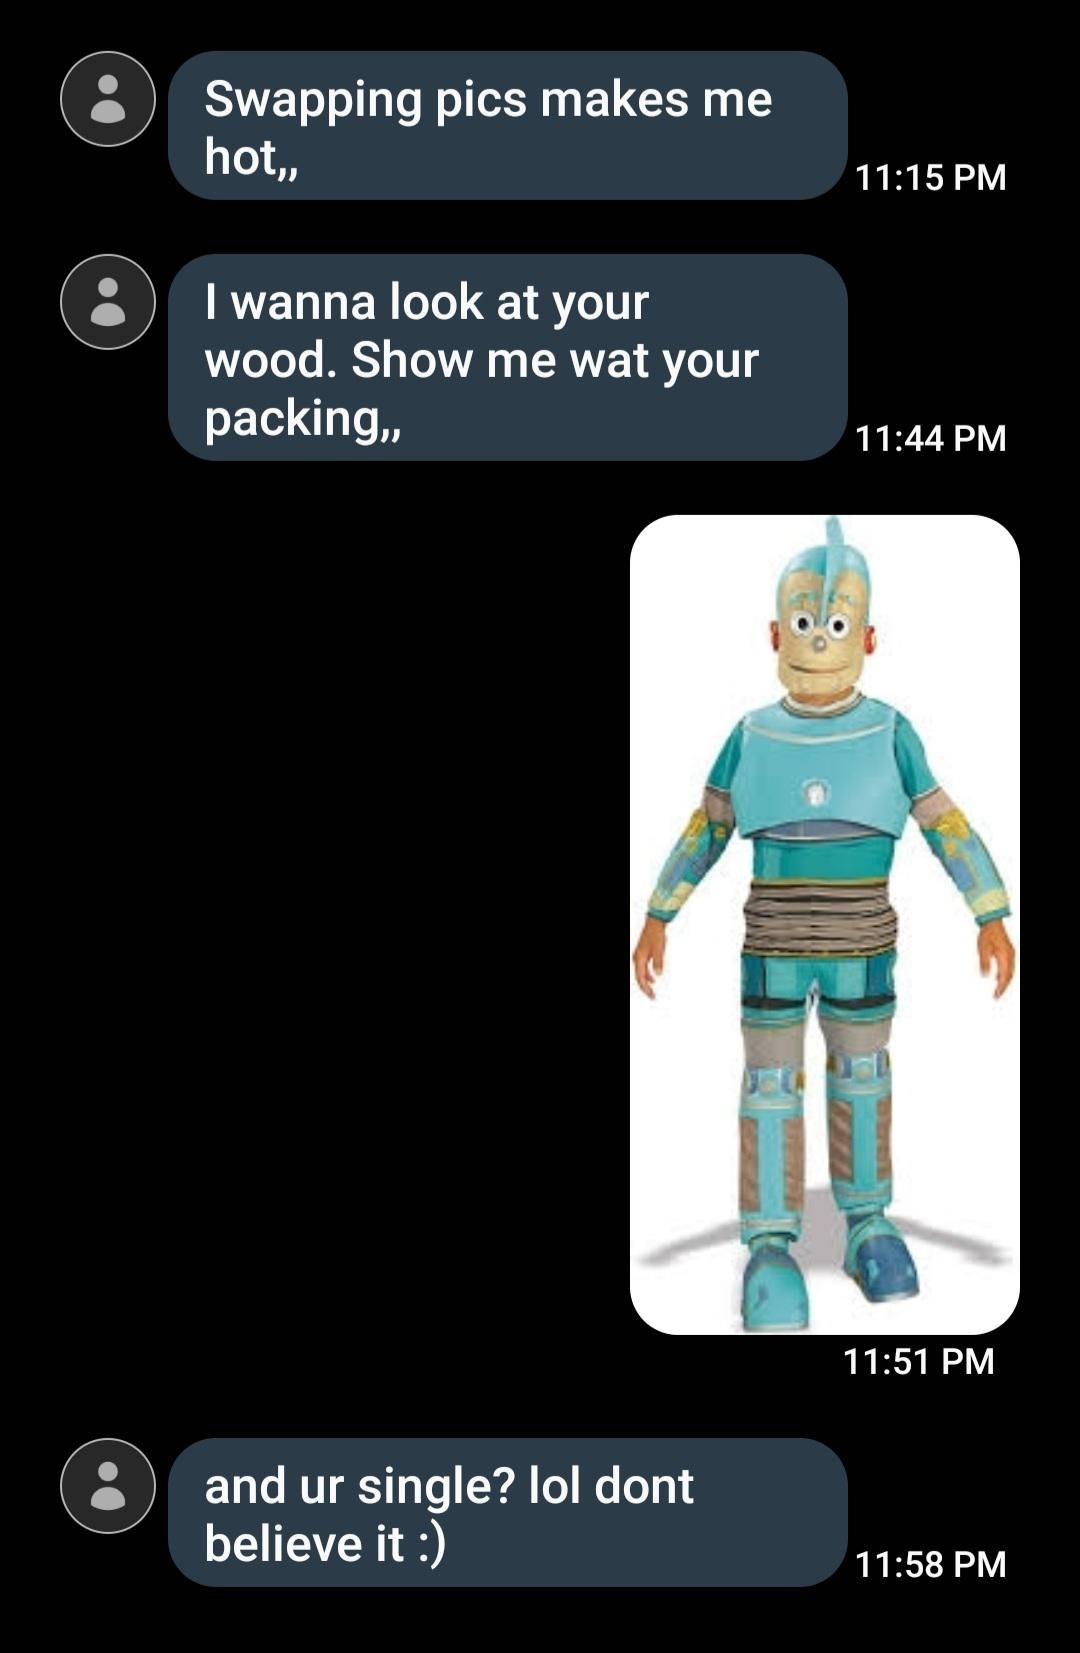 scammer asks for hot pics of wood and the other person sends a wooden puppet